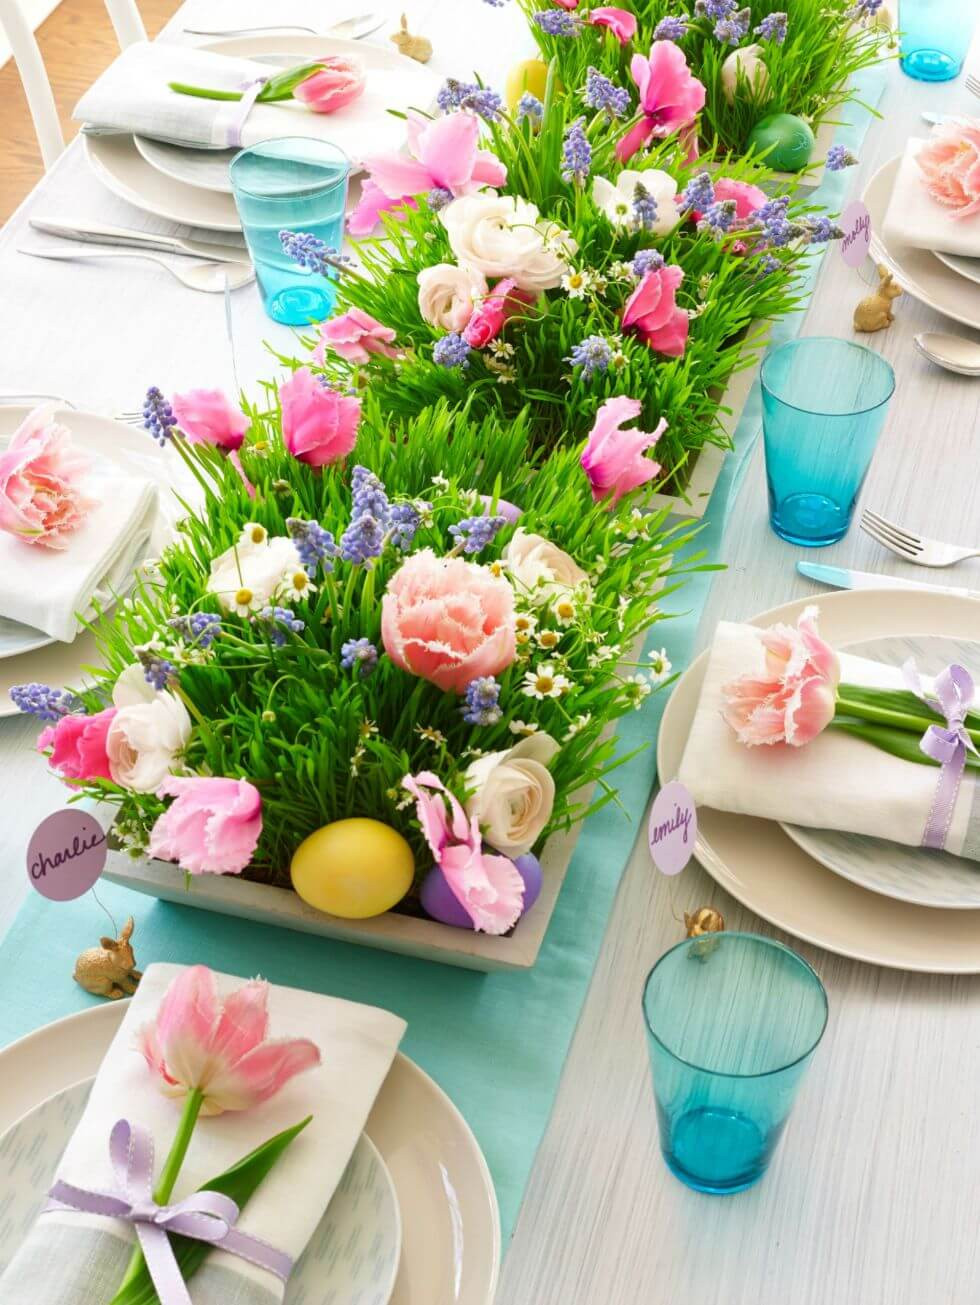 Easter Party Centerpiece Ideas
 27 Best DIY Easter Centerpieces Ideas and Designs for 2019